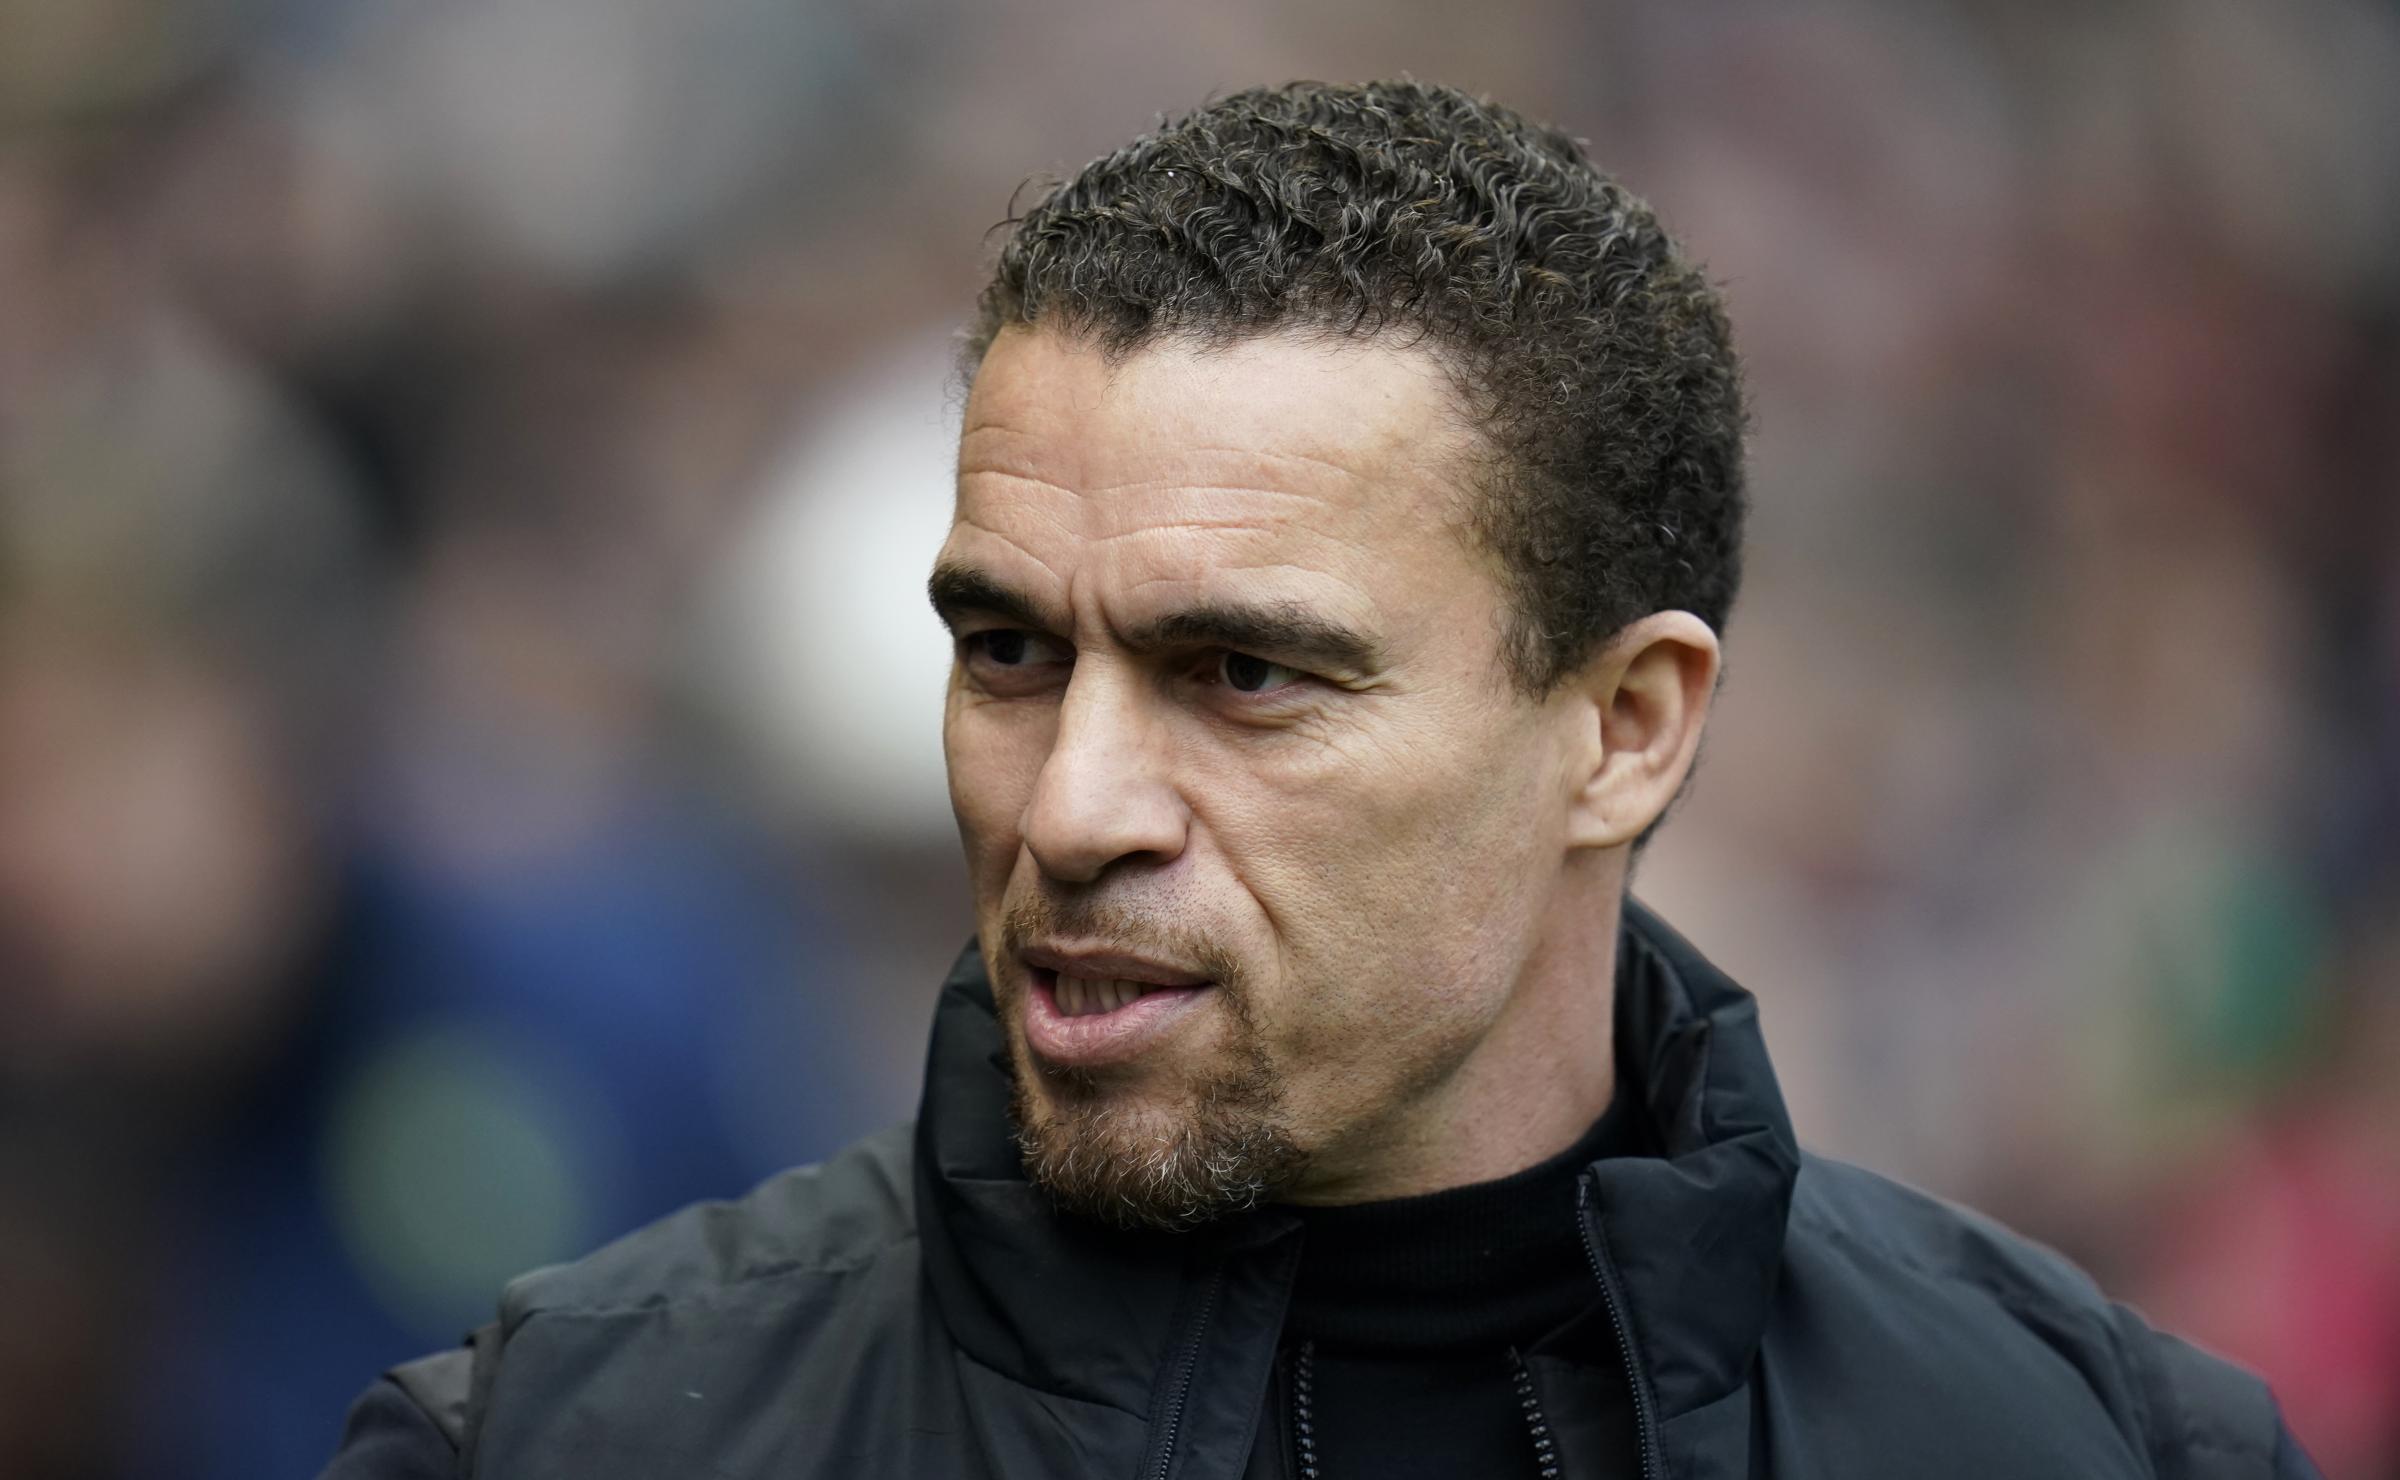 Watford's schedule not helping with training says Ismael